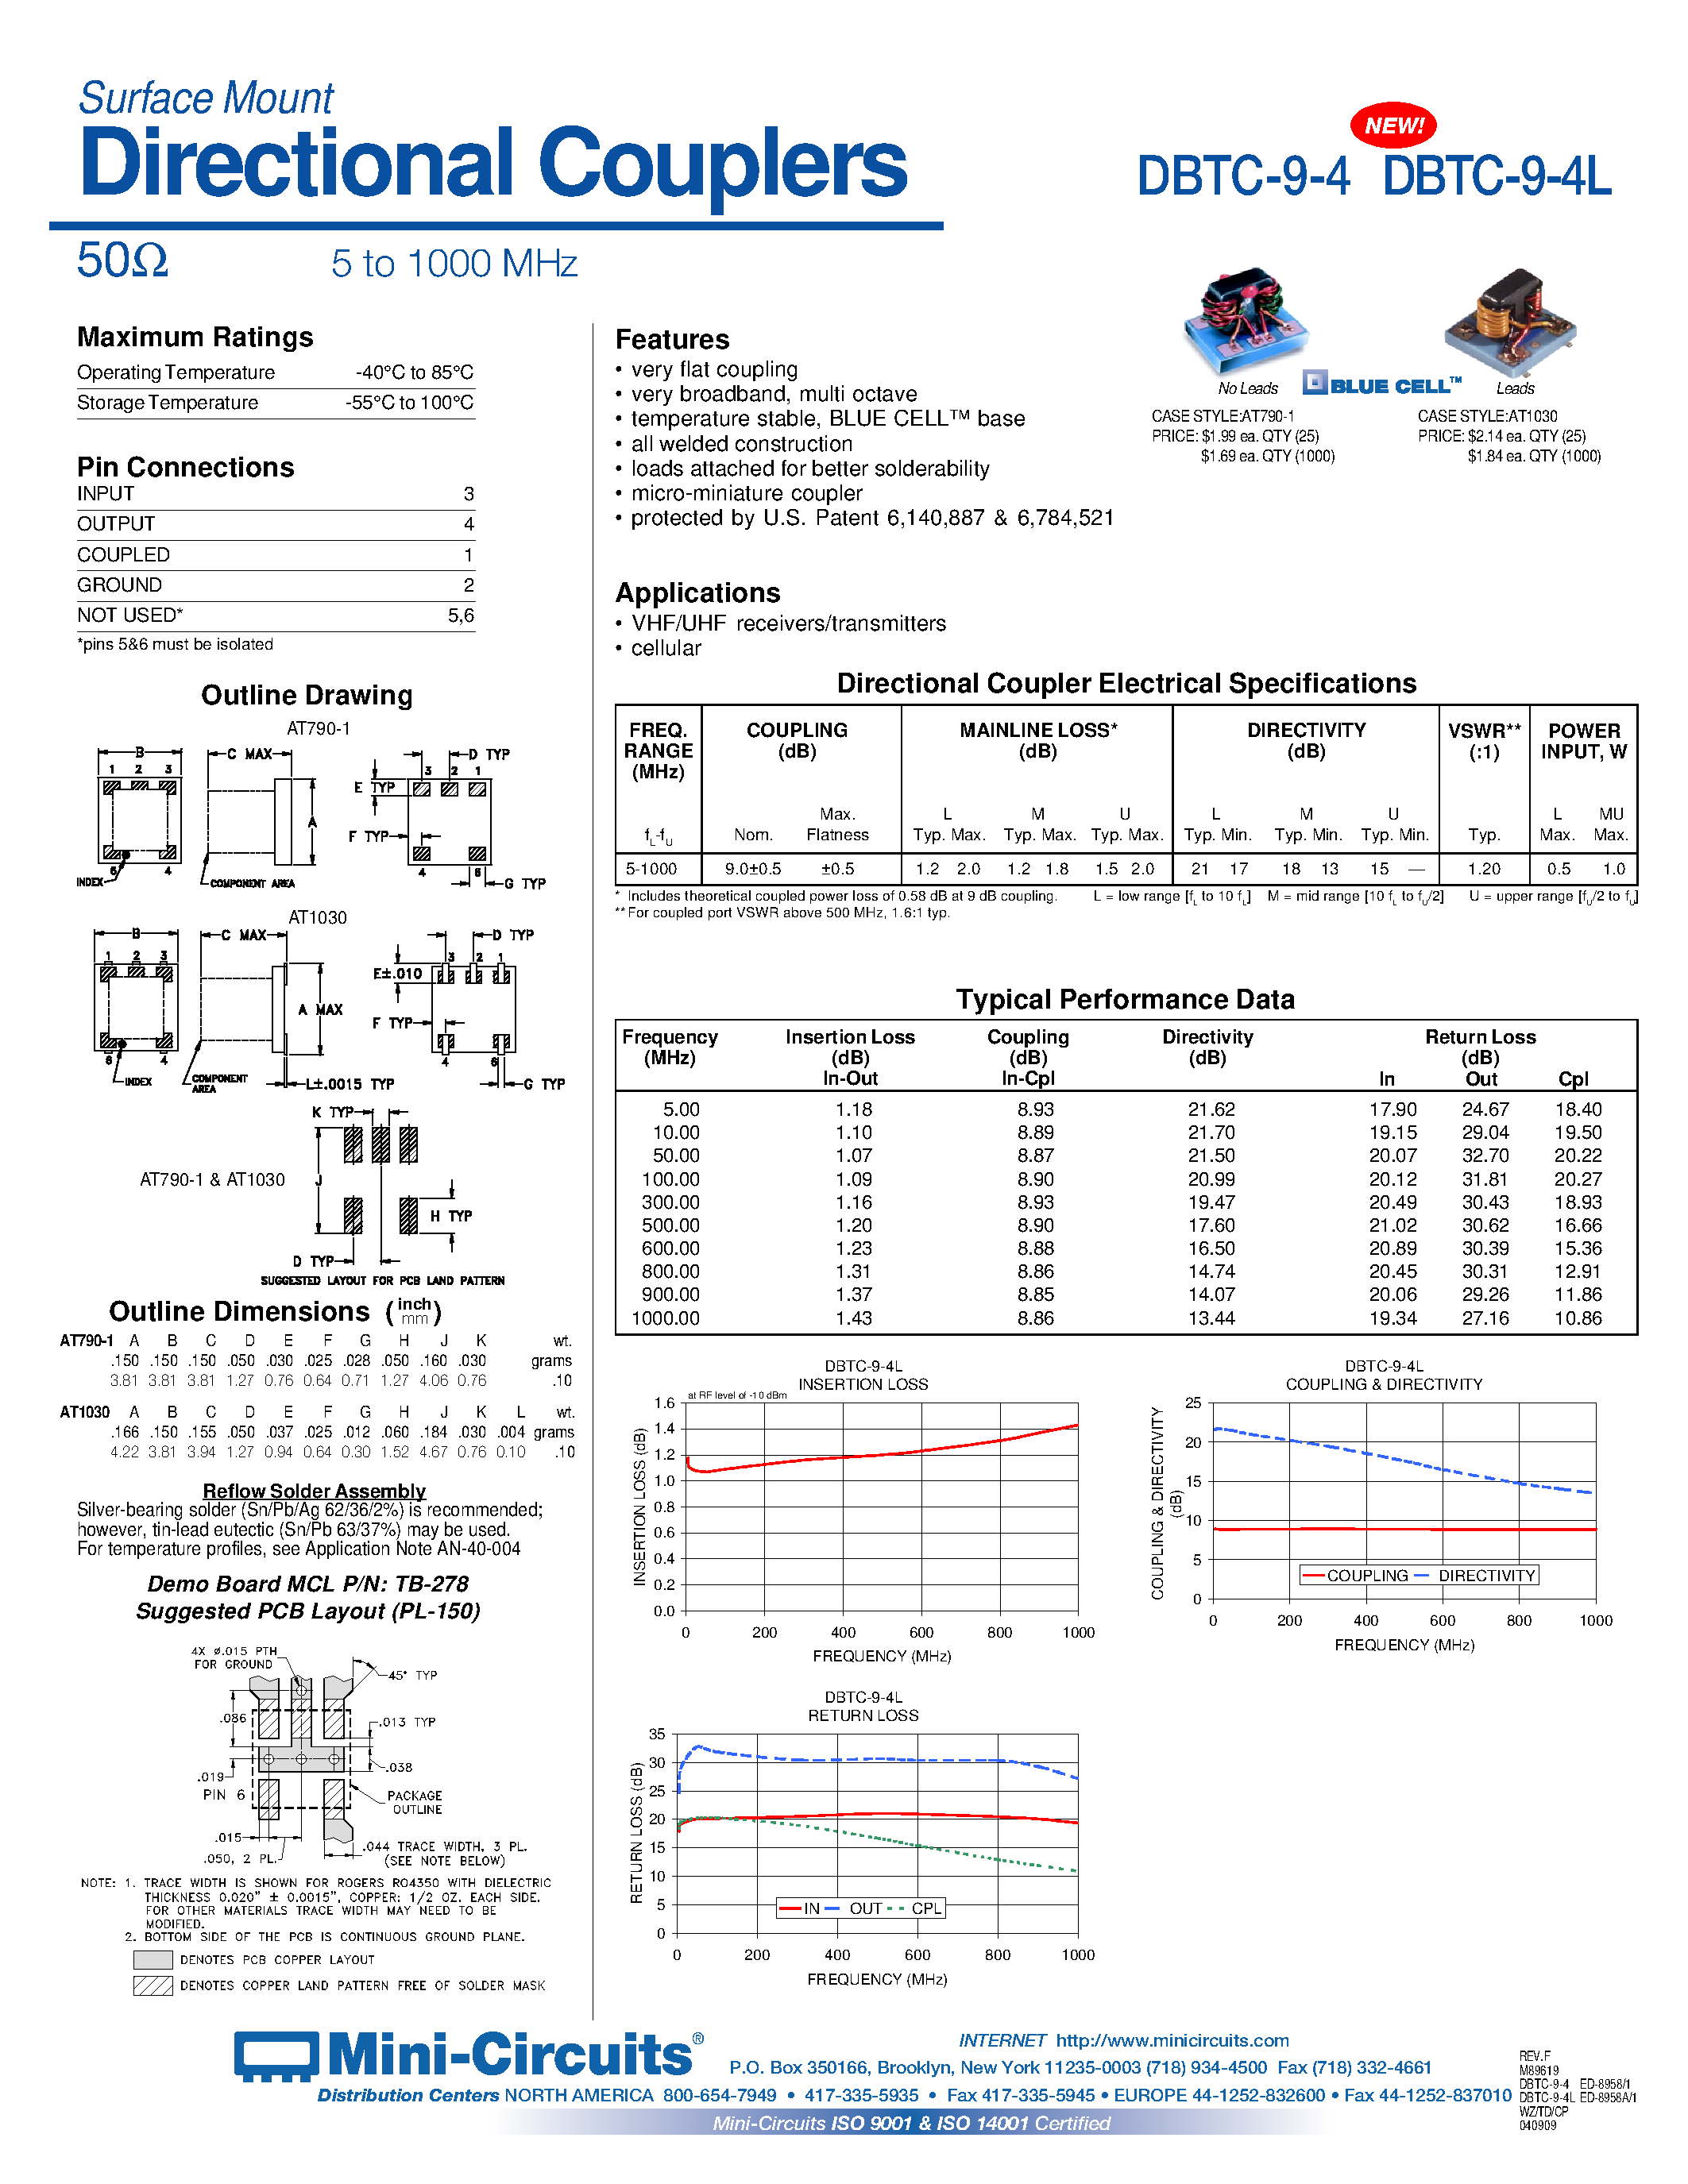 Datasheet DBTC-9-4_4L - Surface Mount Directional Couplers 50 5 to 1000 MHz page 1